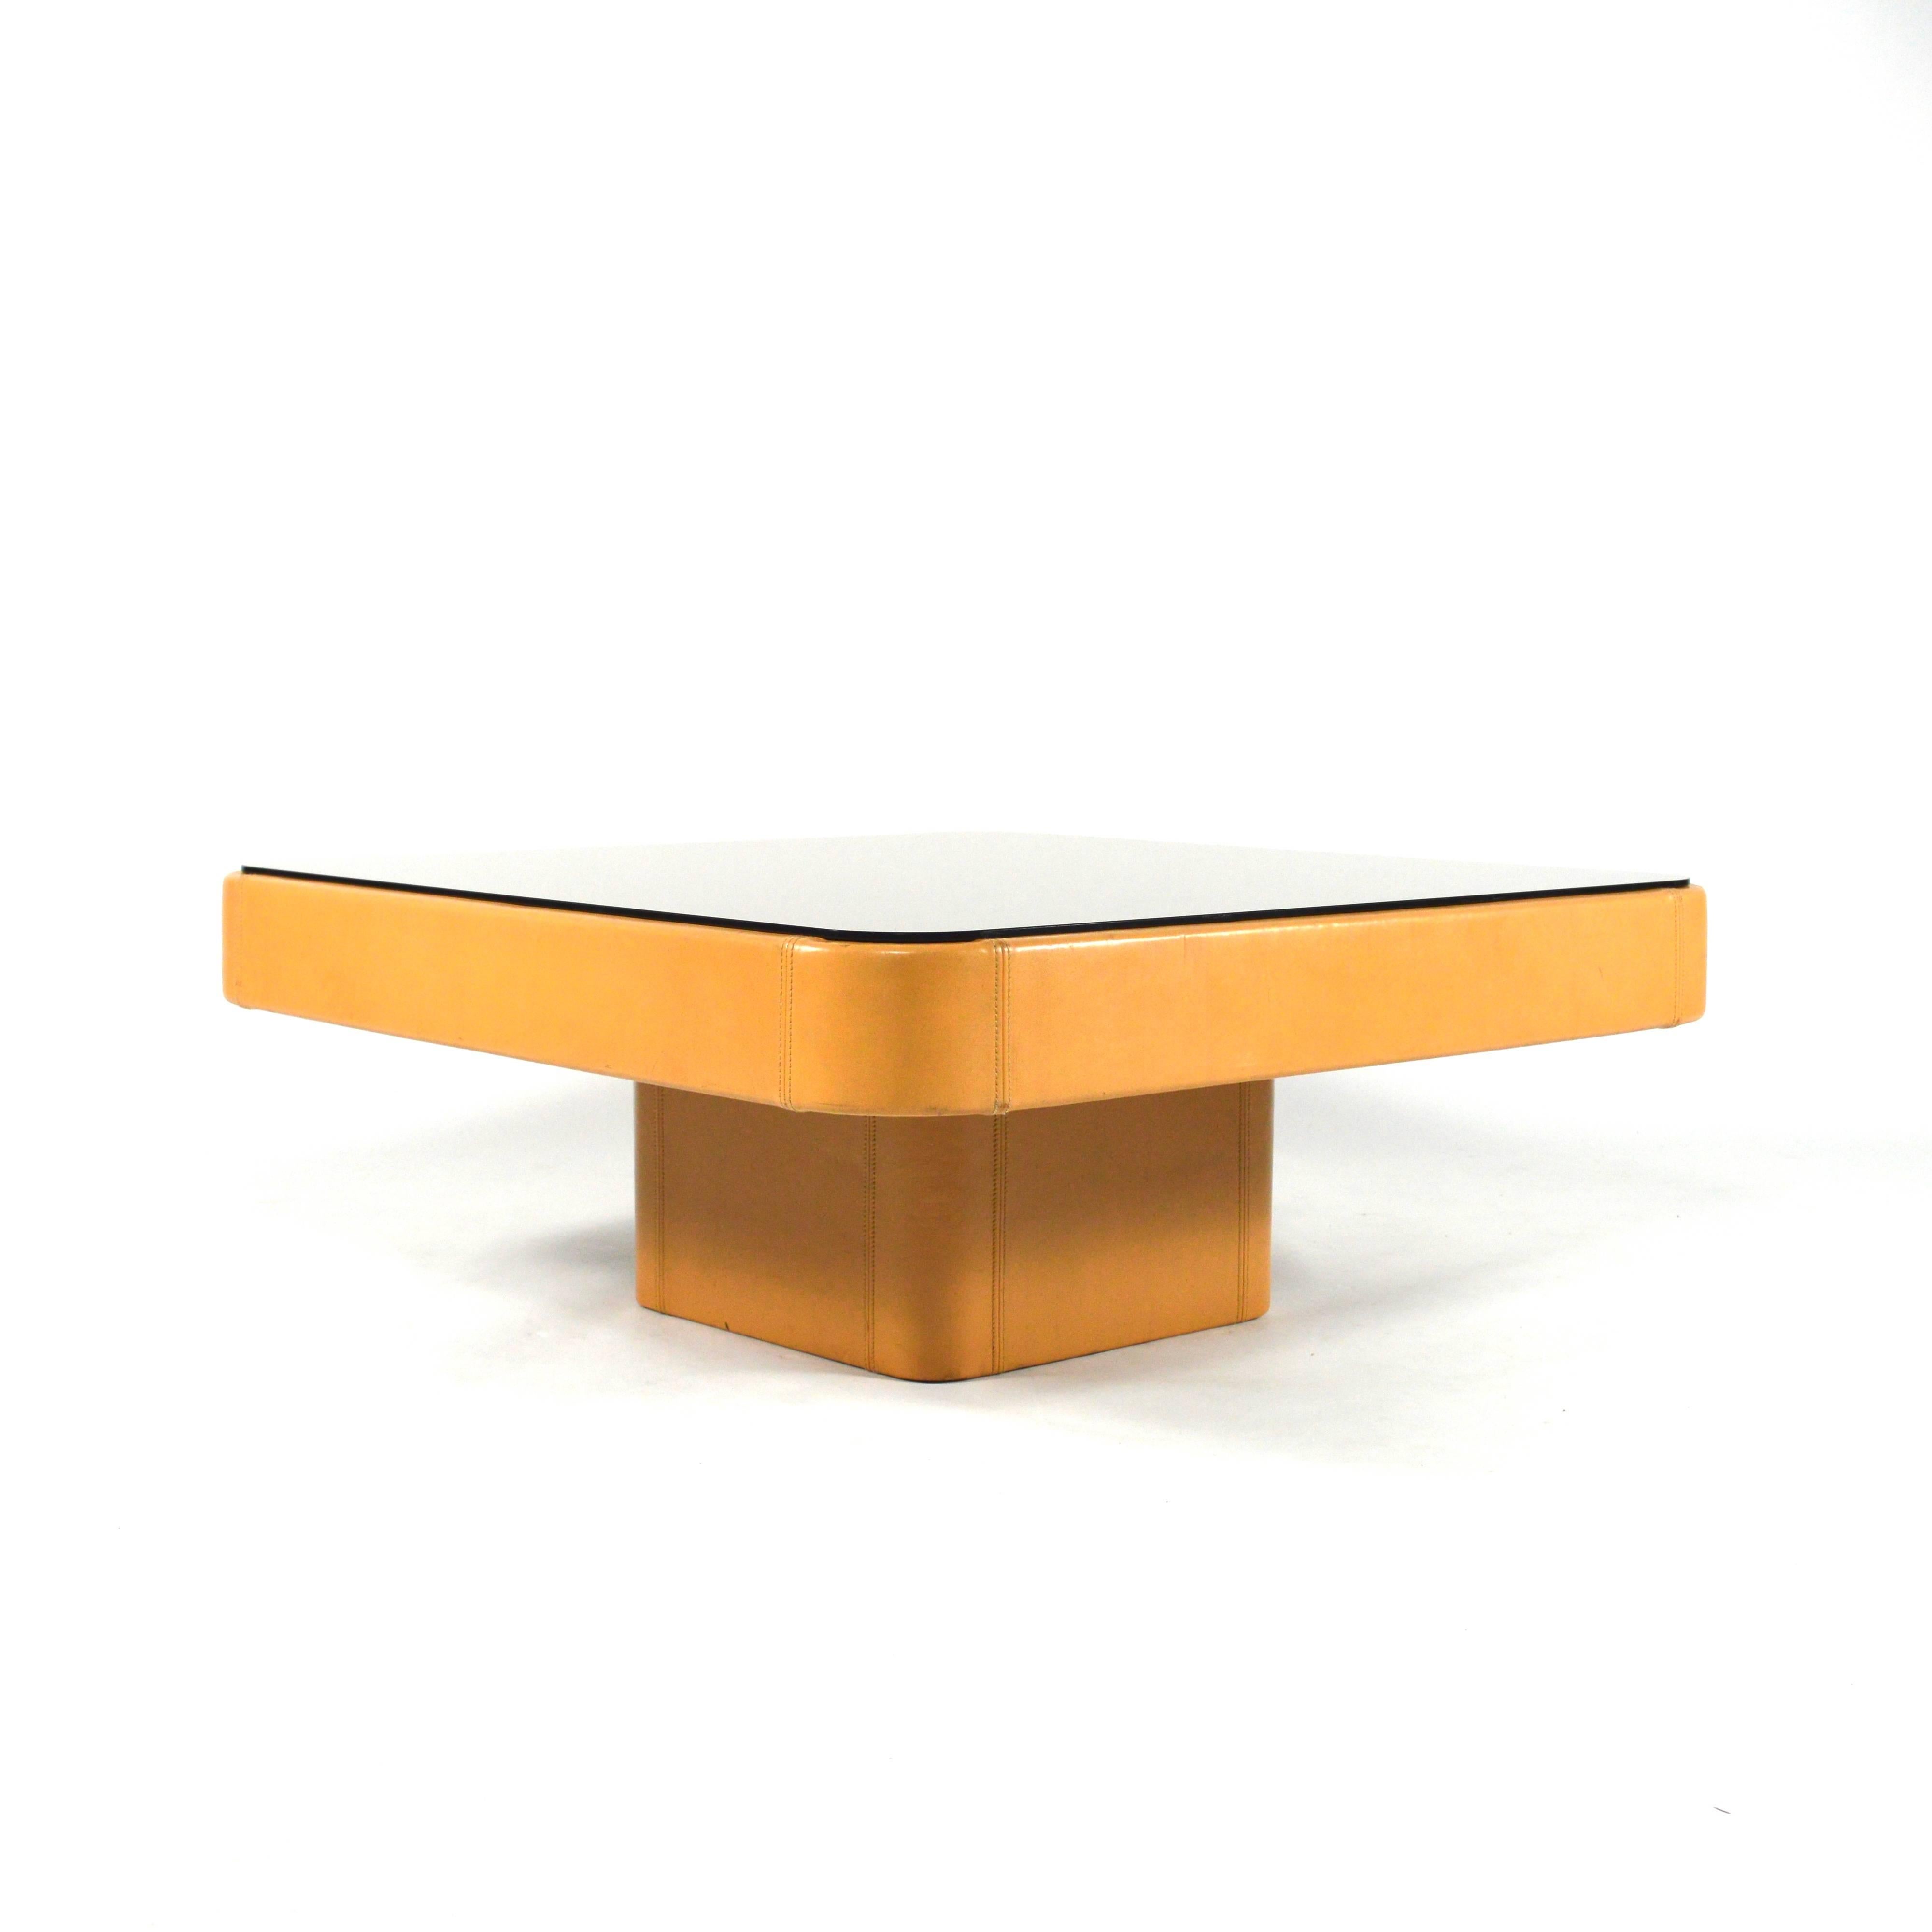 Swiss De Sede Leather and Mirrored Glass Coffee Table, Switzerland, 1960-1970s